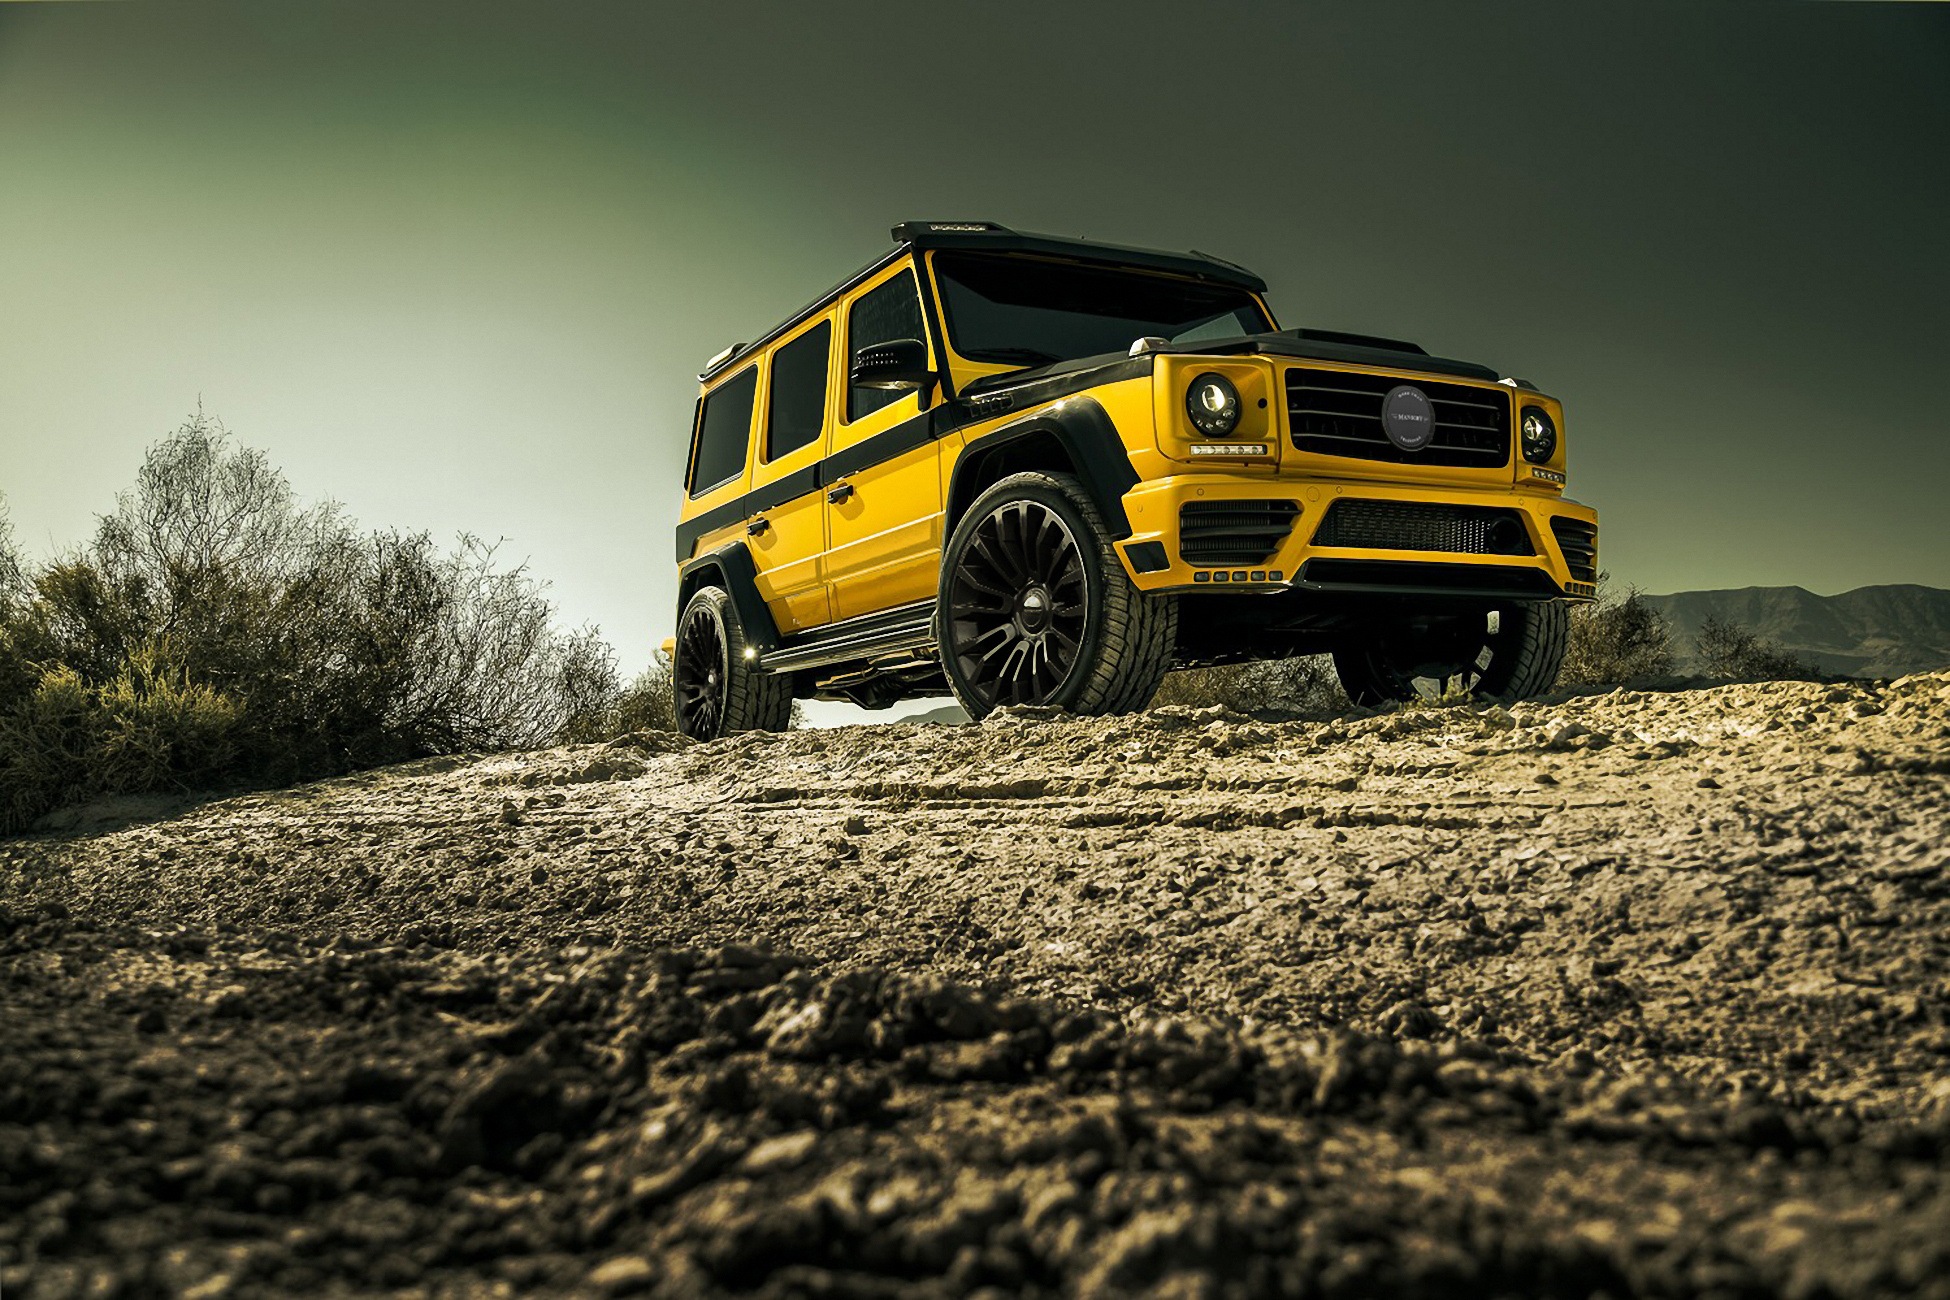 Download this stock image: Luxury car in gold paint, Mercedes Benz W463, G- Class, Brabus G850 6.0 Widestar, parked in fro…